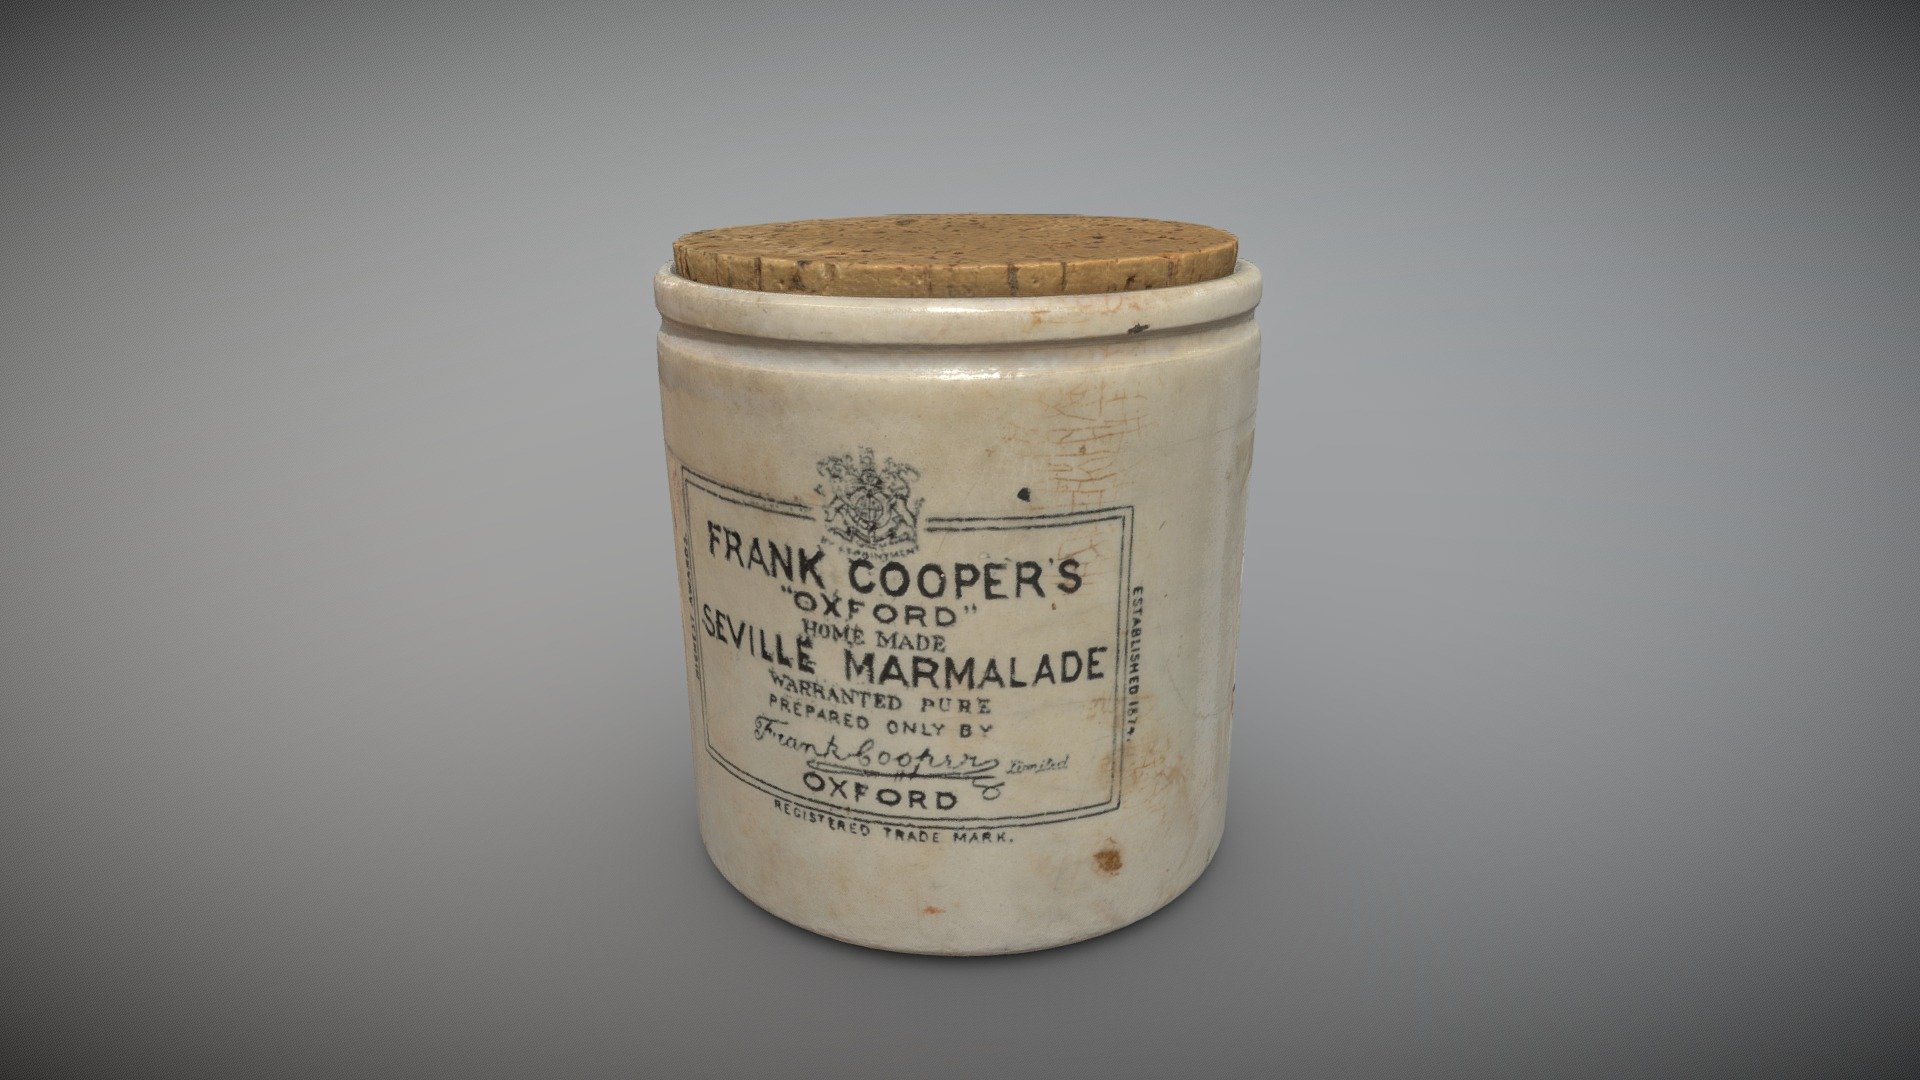 Vintage Frank Cooper's marmalade jar with cork lid photogrammetry scan. This model of two parts, the main jar and the cork lid. 

The Marmalade Jar scan was made using 216 images and the cork lid using 72 images on a Canon EOS R + 50mm Canon Prime lens. 

Created in reality capture and altereed in Blender. The Jar was originally 16.3m polys and the lid was 7.9m polys 3d model